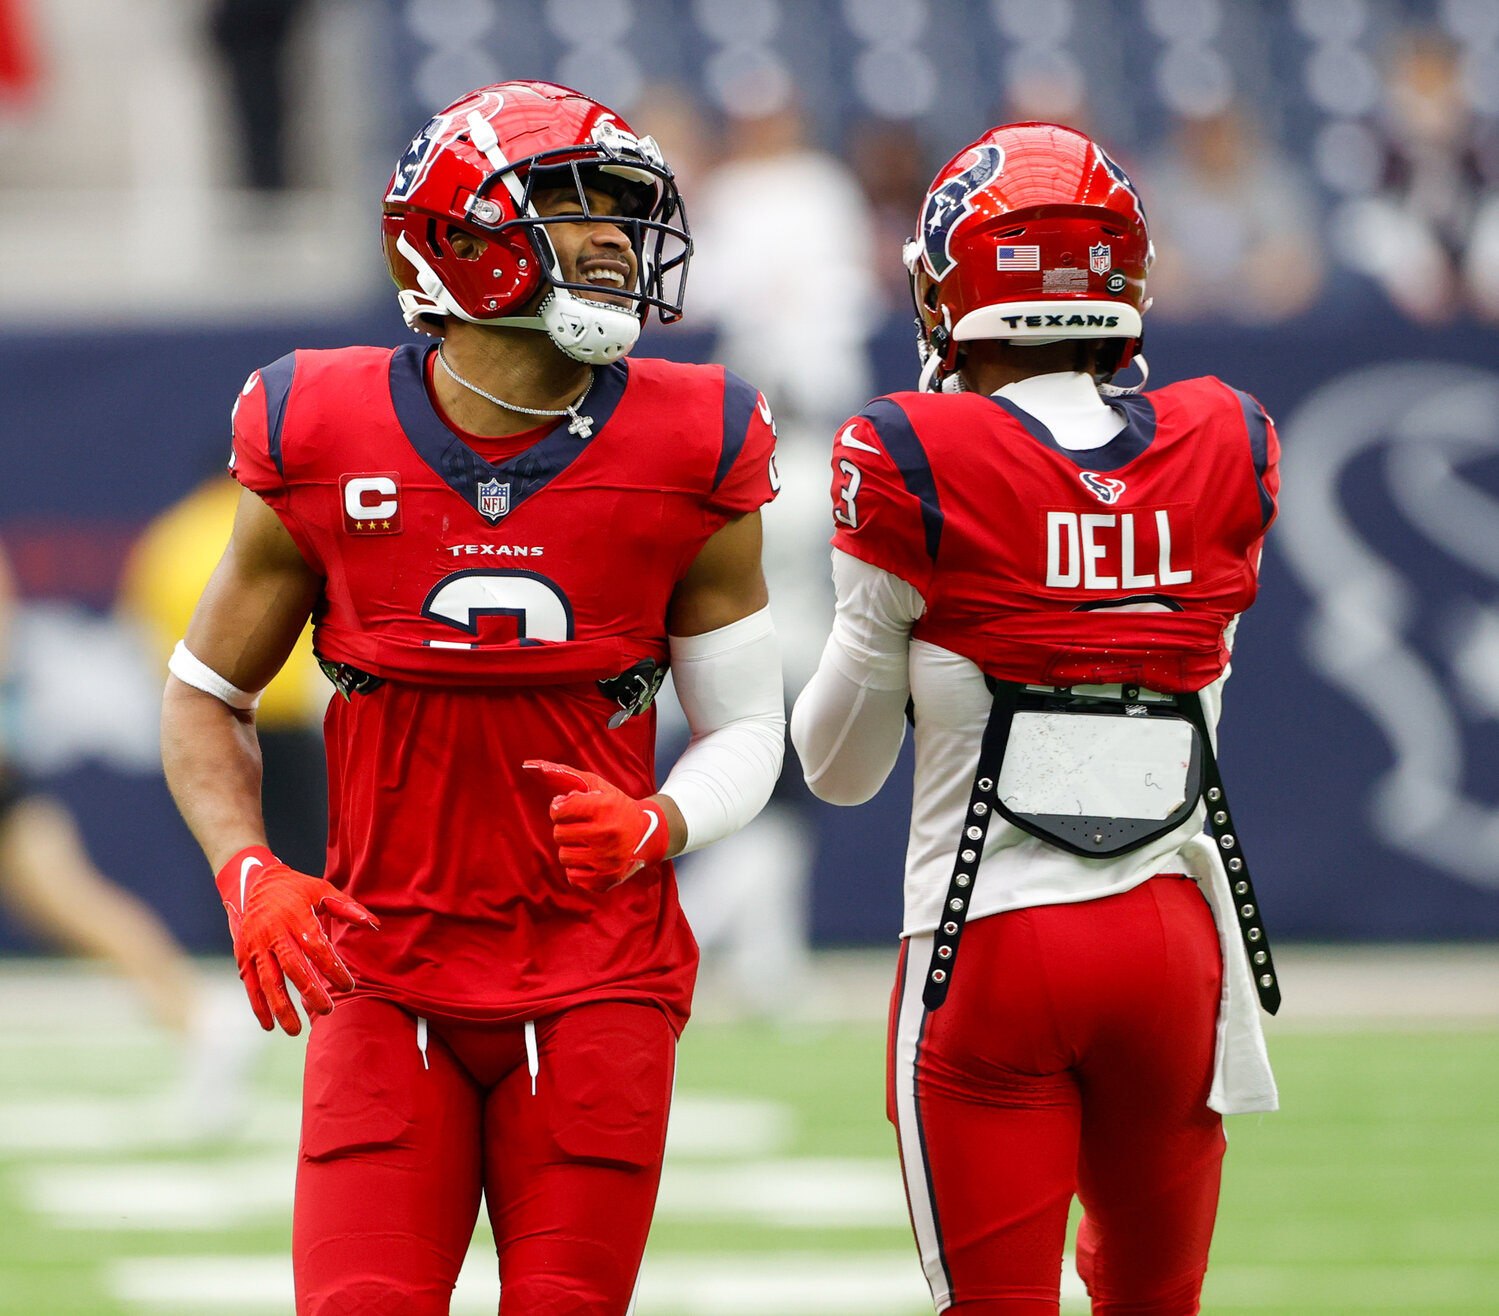 Texans wide receiver Robert Woods (2) shares a laugh with wide receiver Tank Dell (3) during warmups before an NFL game between the Texans and the Jaguars on November 26, 2023, in Houston.